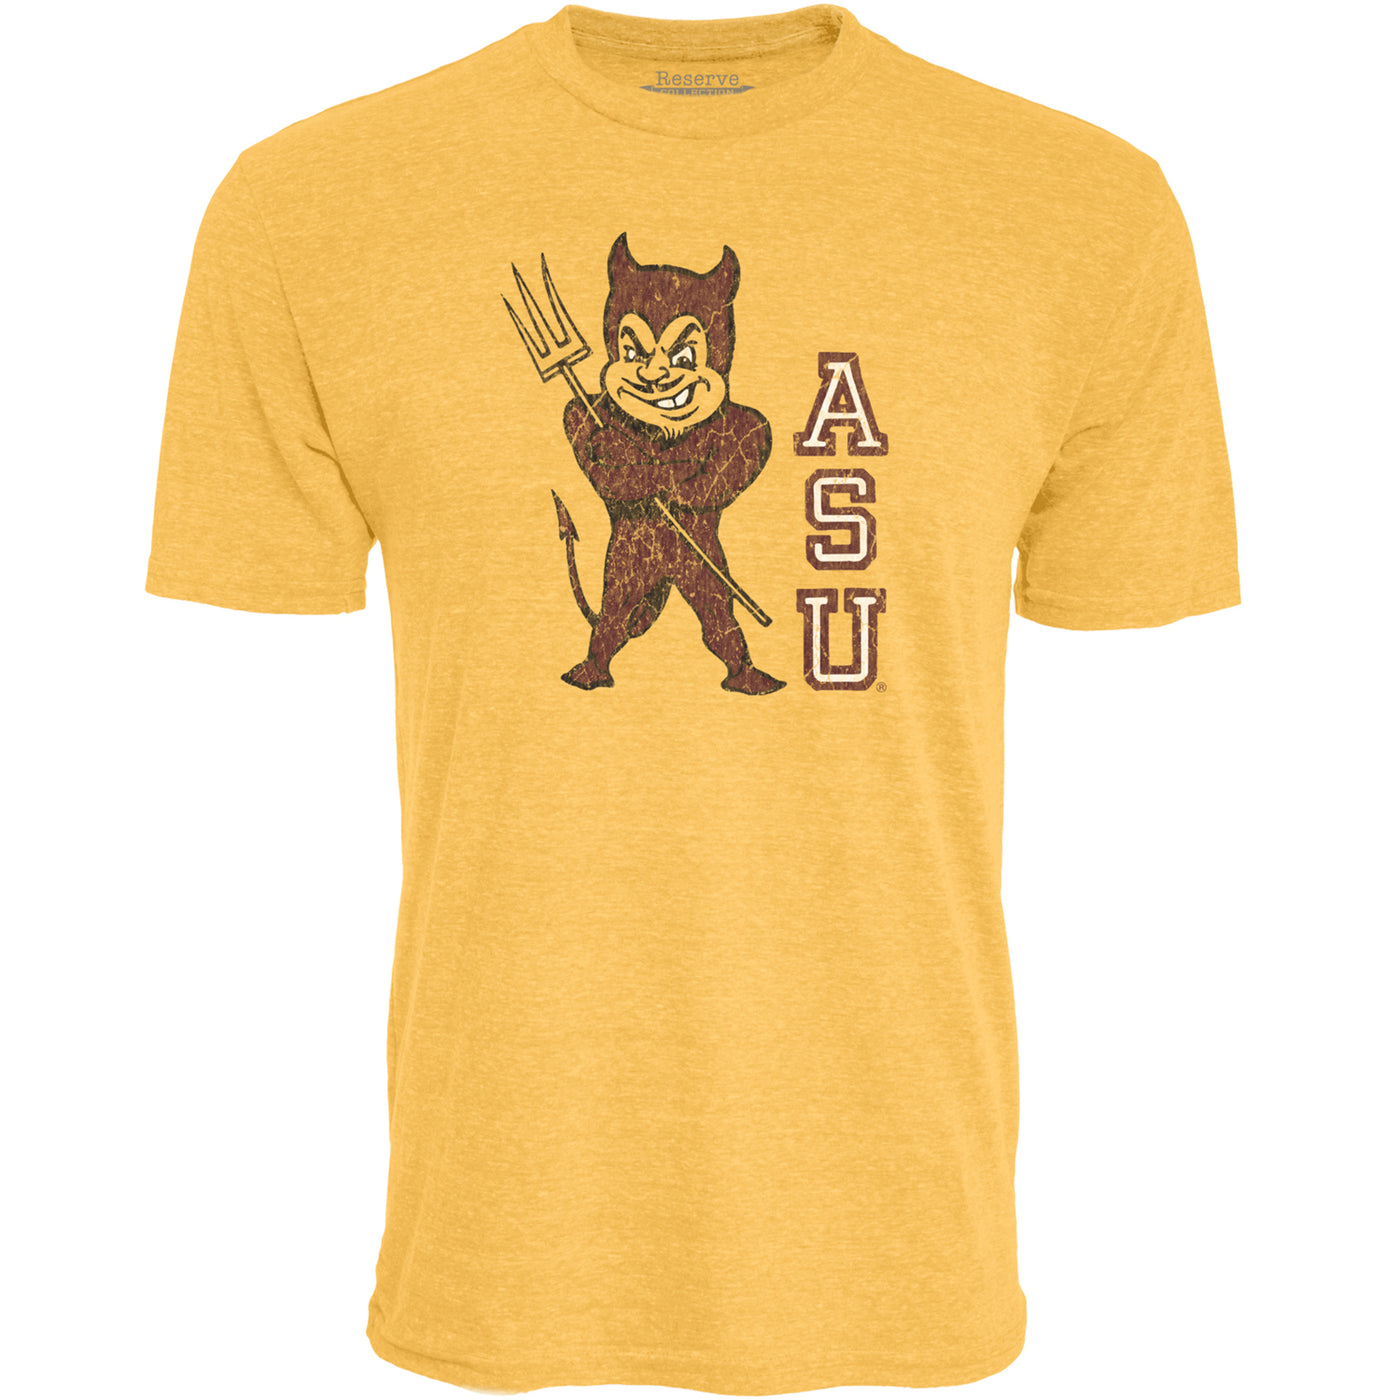 ASU gold tee with retro Sparky print next to 'ASU' letters stacked on top of each other